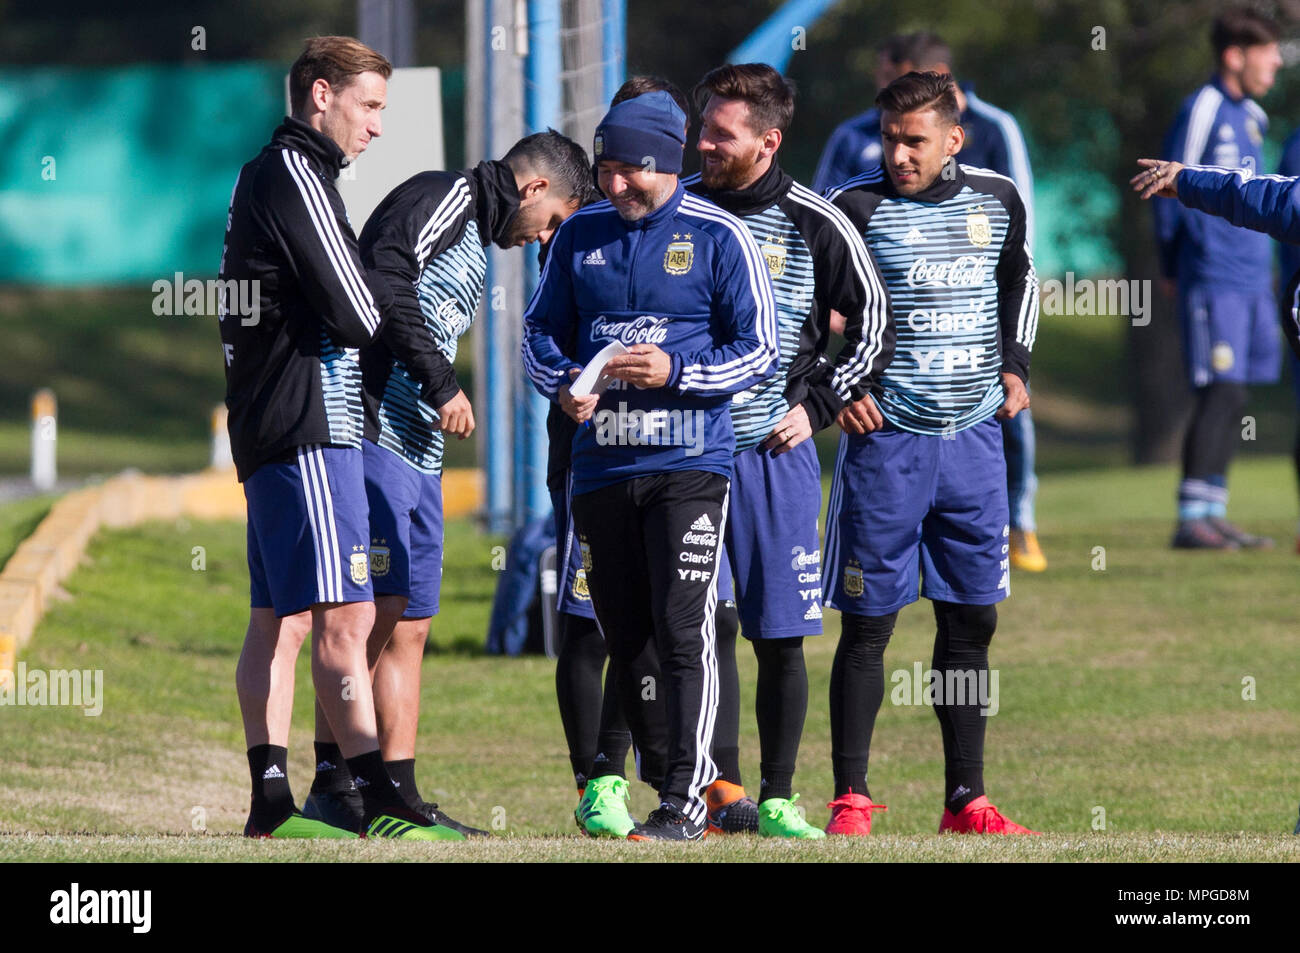 Ezeiza, Argentina. 23rd May, 2018. Lucas Biglia, Sergio Aguero, head coach Jorge Sampaoli, Lionel Messi and Giovani Lo Celso (L-R) of Argentina's national soccer team participate in a training session before the Russia 2018 FIFA World Cup finals in Ezeiza, Argentina, on May 23, 2018. Credit: Martin Zabala/Xinhua/Alamy Live News Stock Photo